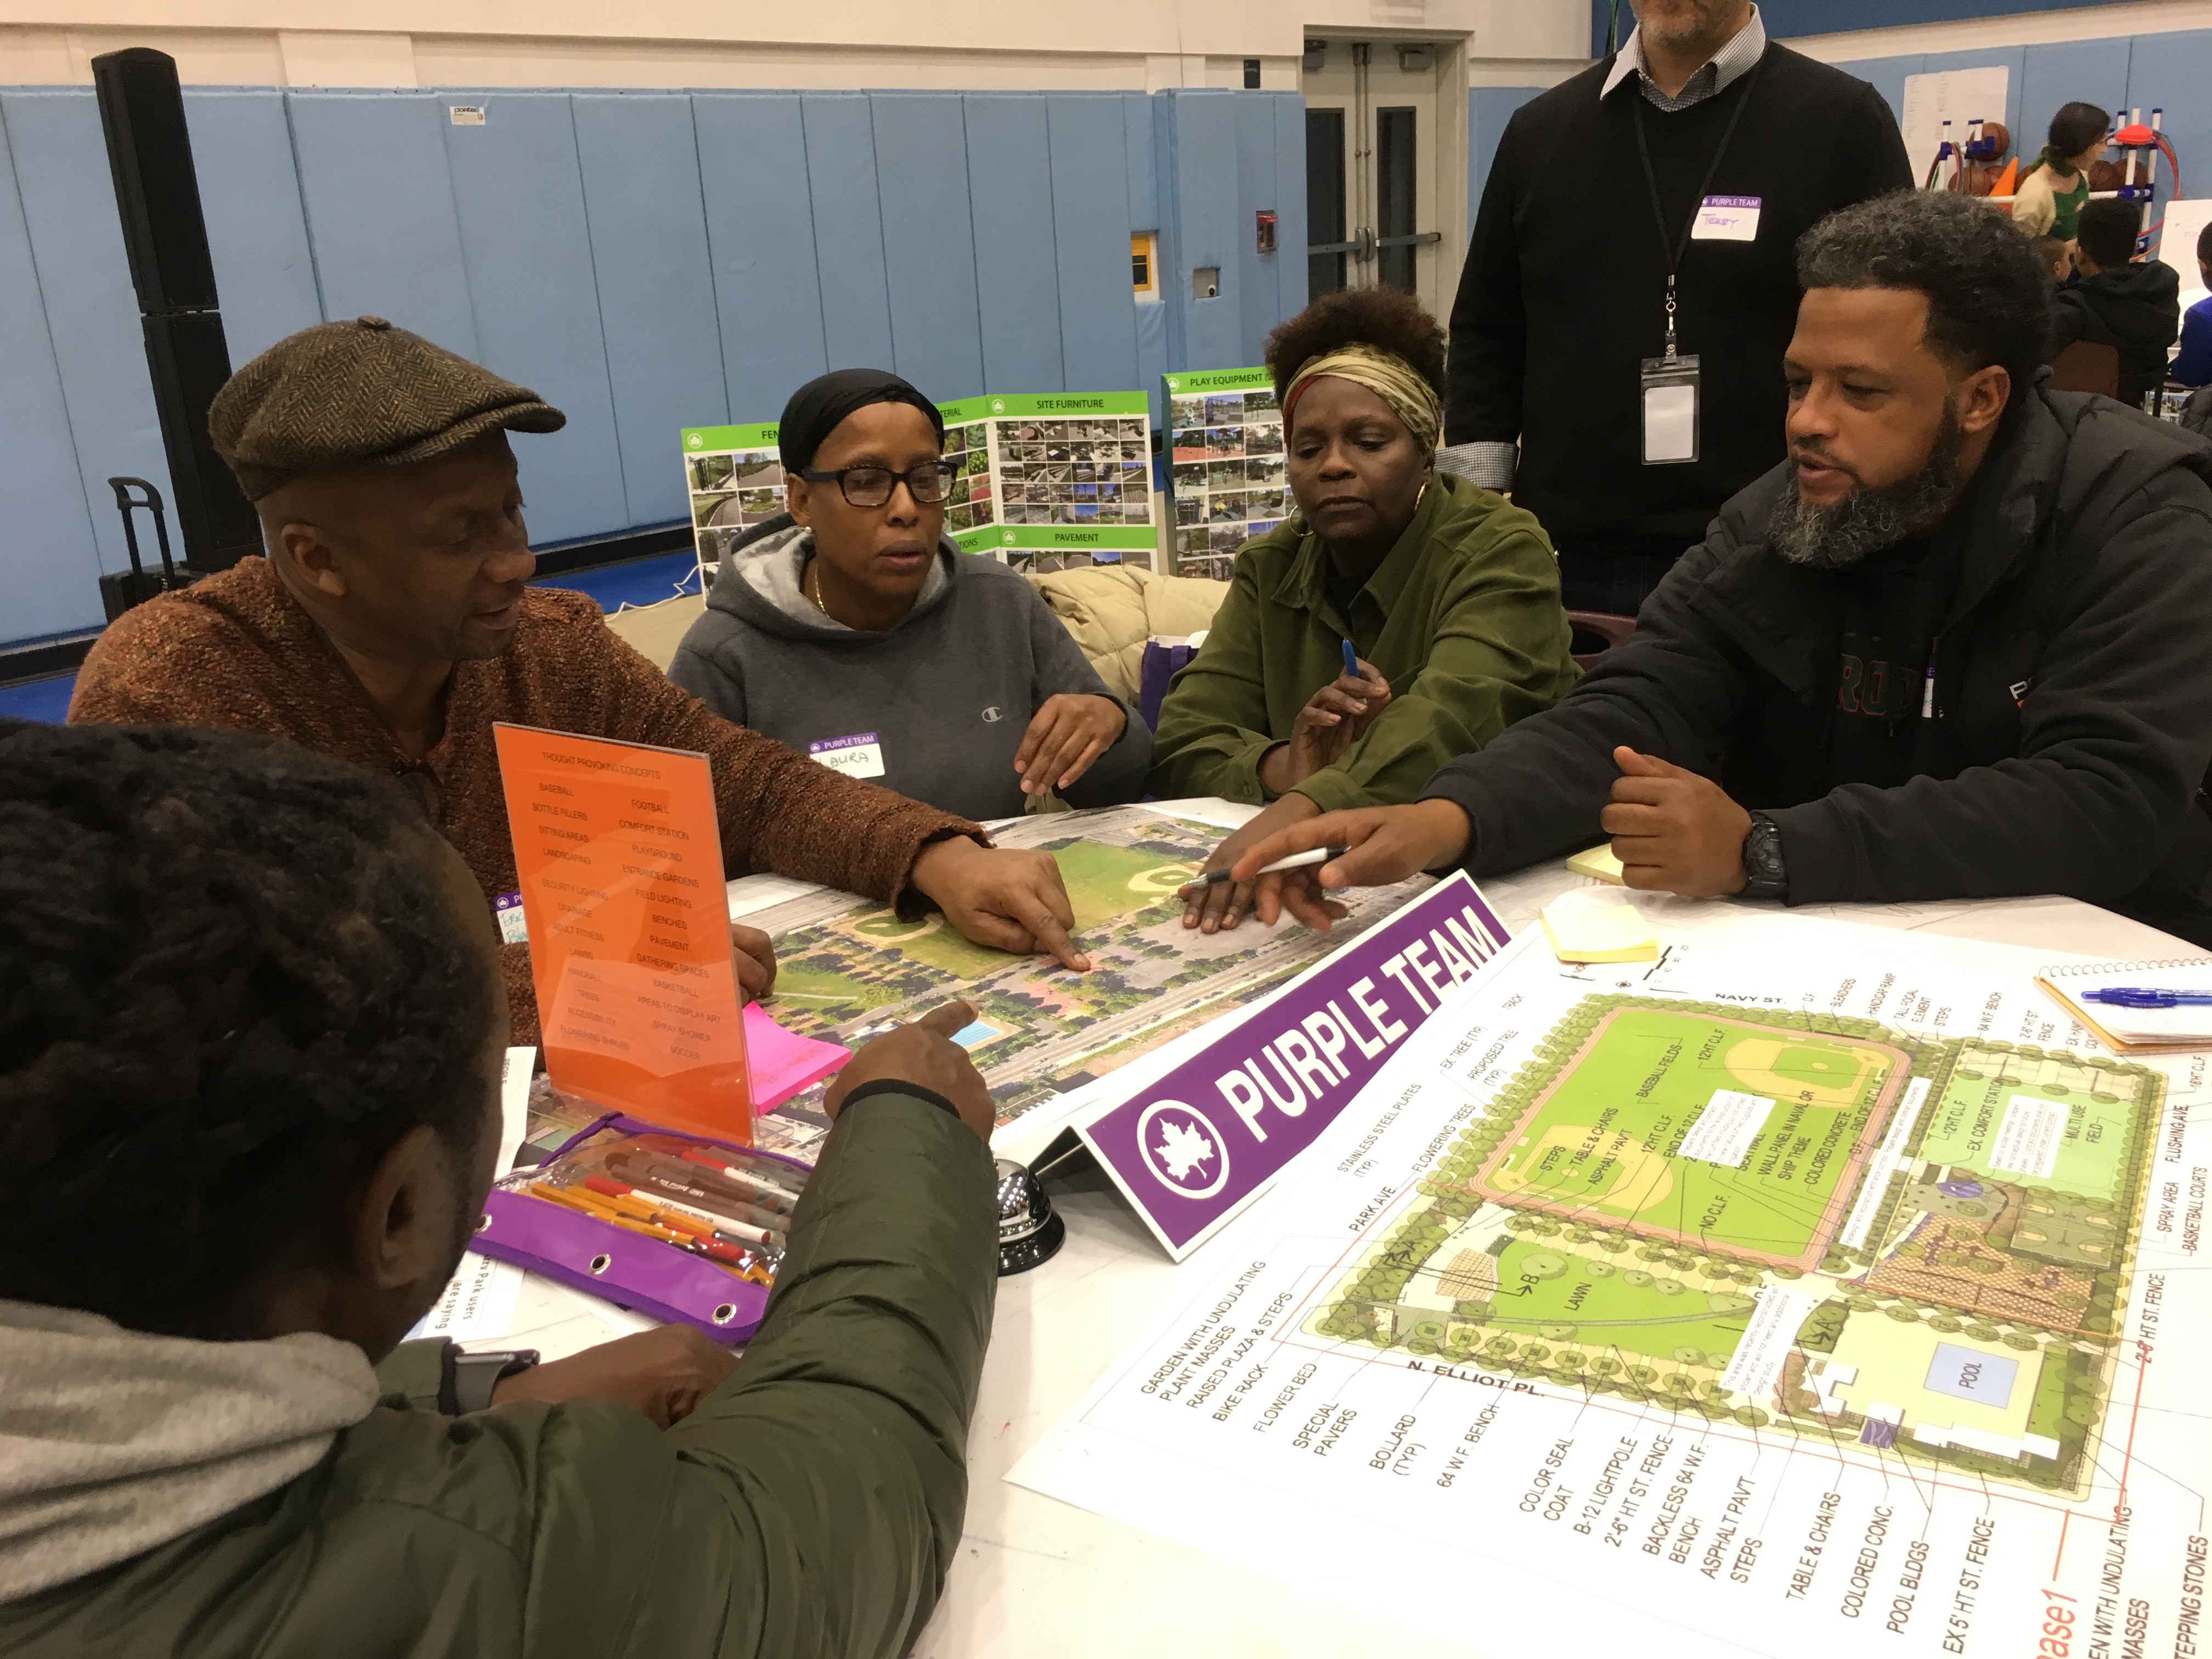 Locals and residents from the Ingersoll Houses discussing the Commodore Barry Park Renovation project. Photo by Israel Rodriguez.